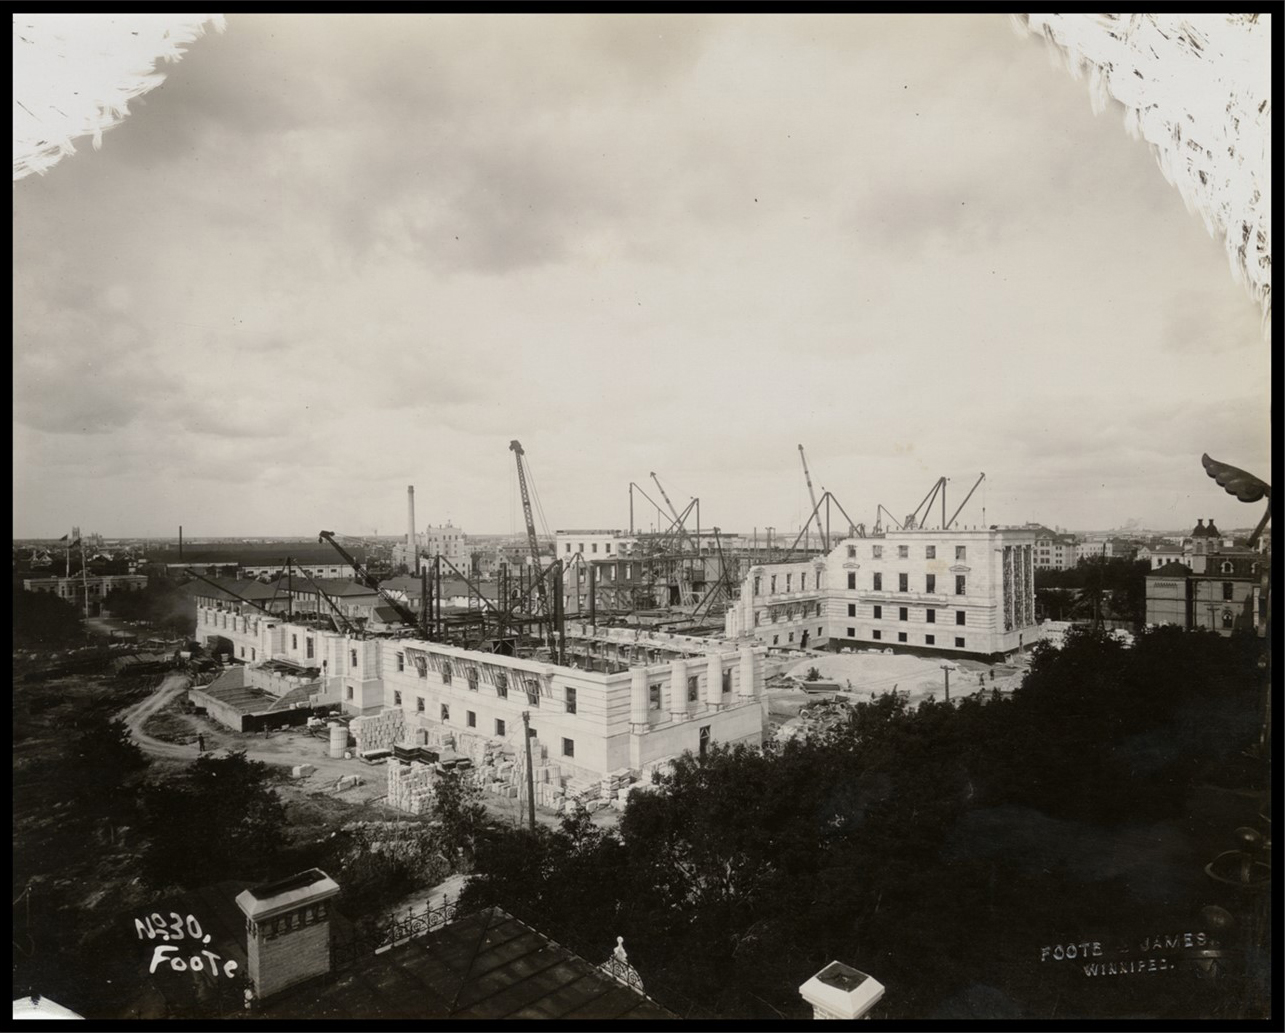 Wide aerial view of the Legislative Building under construction. Some walls are complete, while others are still being created. There are cranes inside the building and no roof.